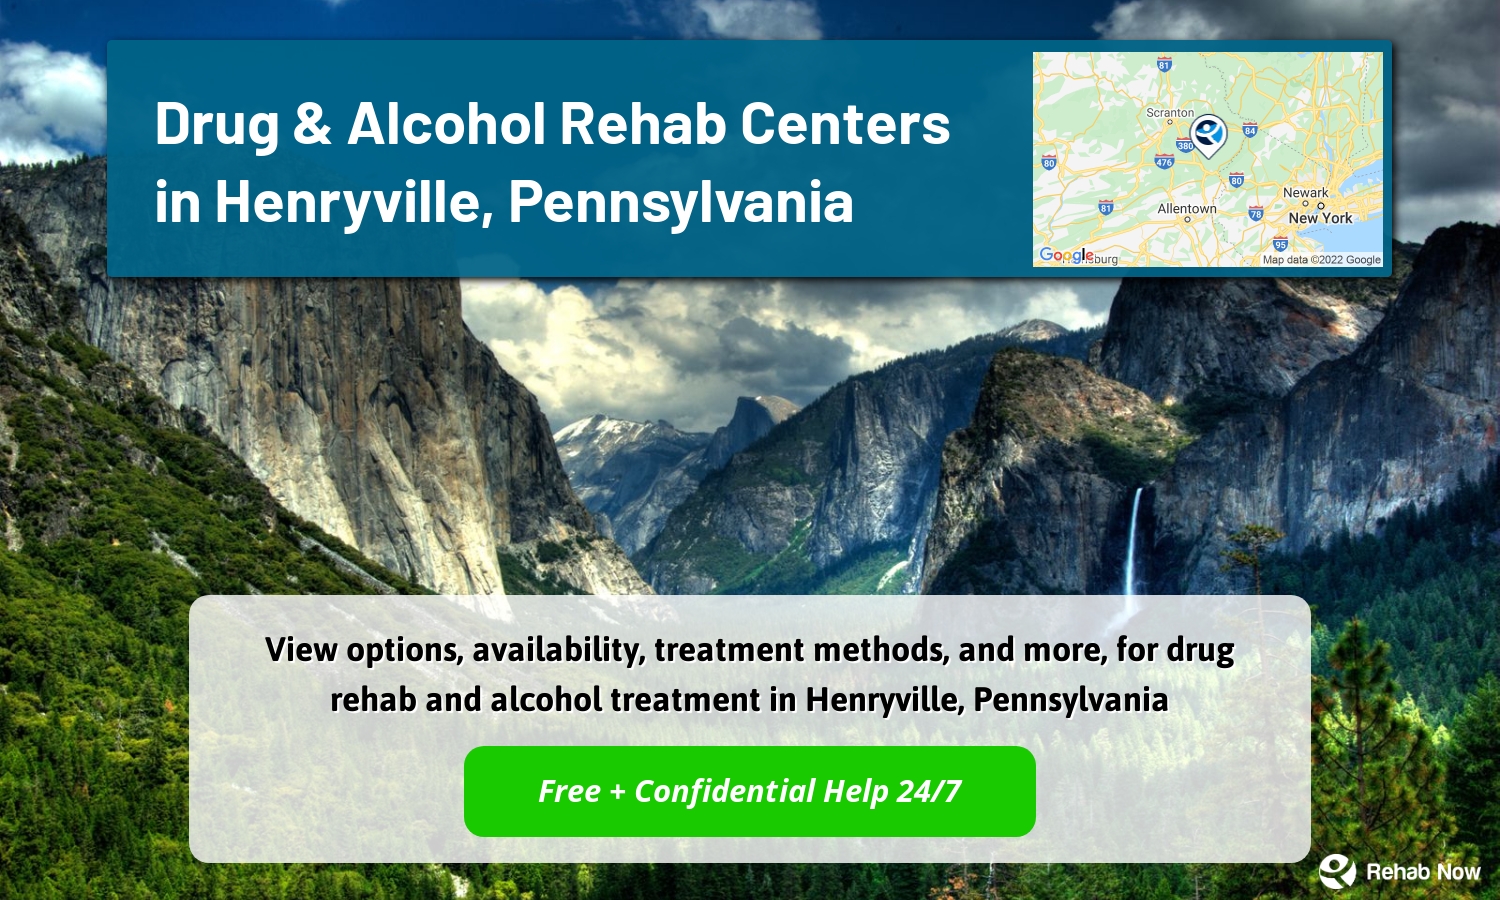 View options, availability, treatment methods, and more, for drug rehab and alcohol treatment in Henryville, Pennsylvania